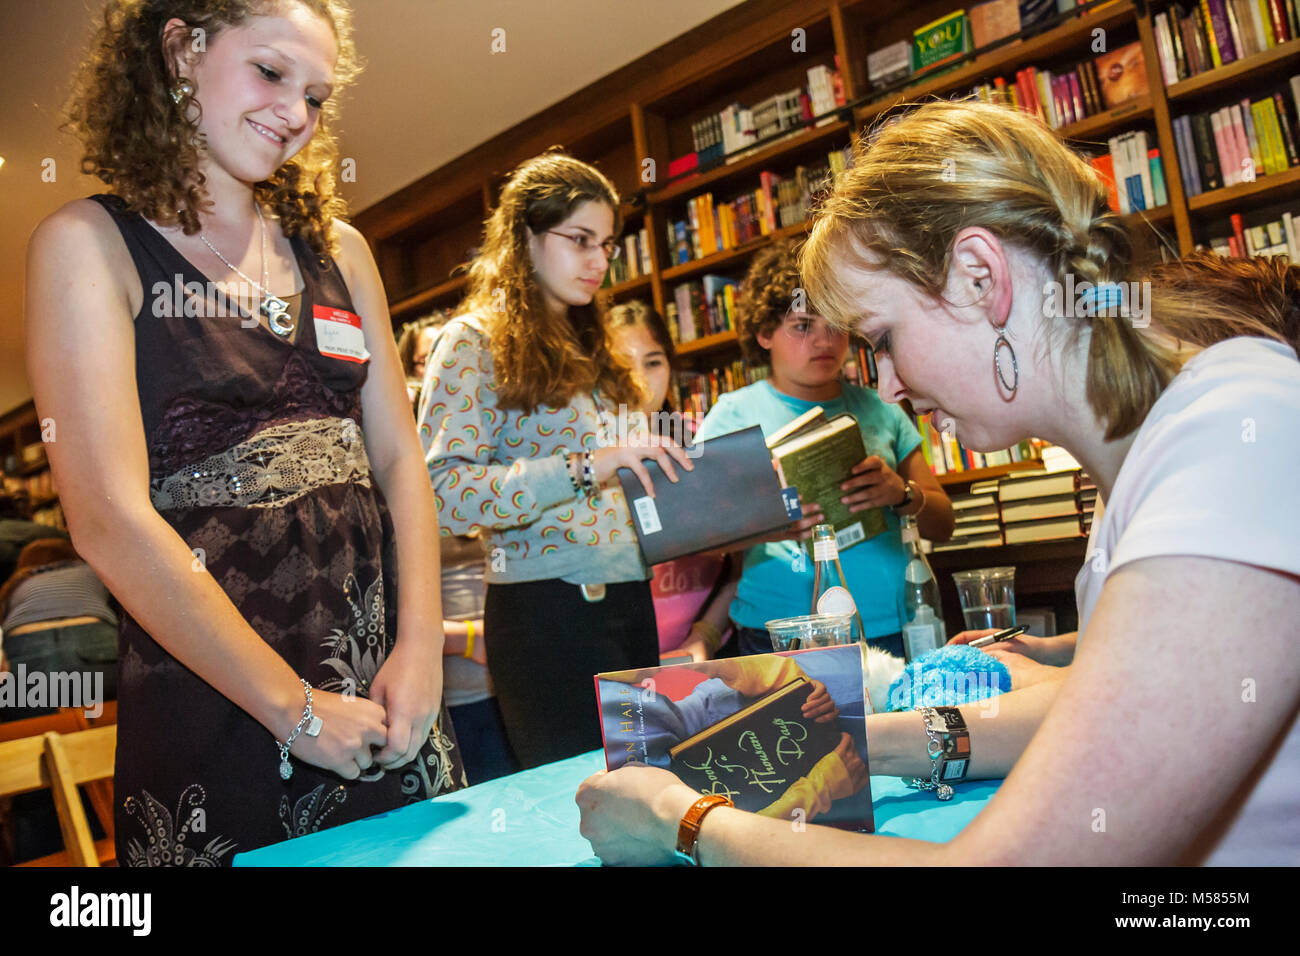 Miami Florida,Coral Gables,Books & Books,Meet the Authors,Shannon Hale,young adult fiction authors,literature,teen teens teenager teenagers girls,sign Stock Photo